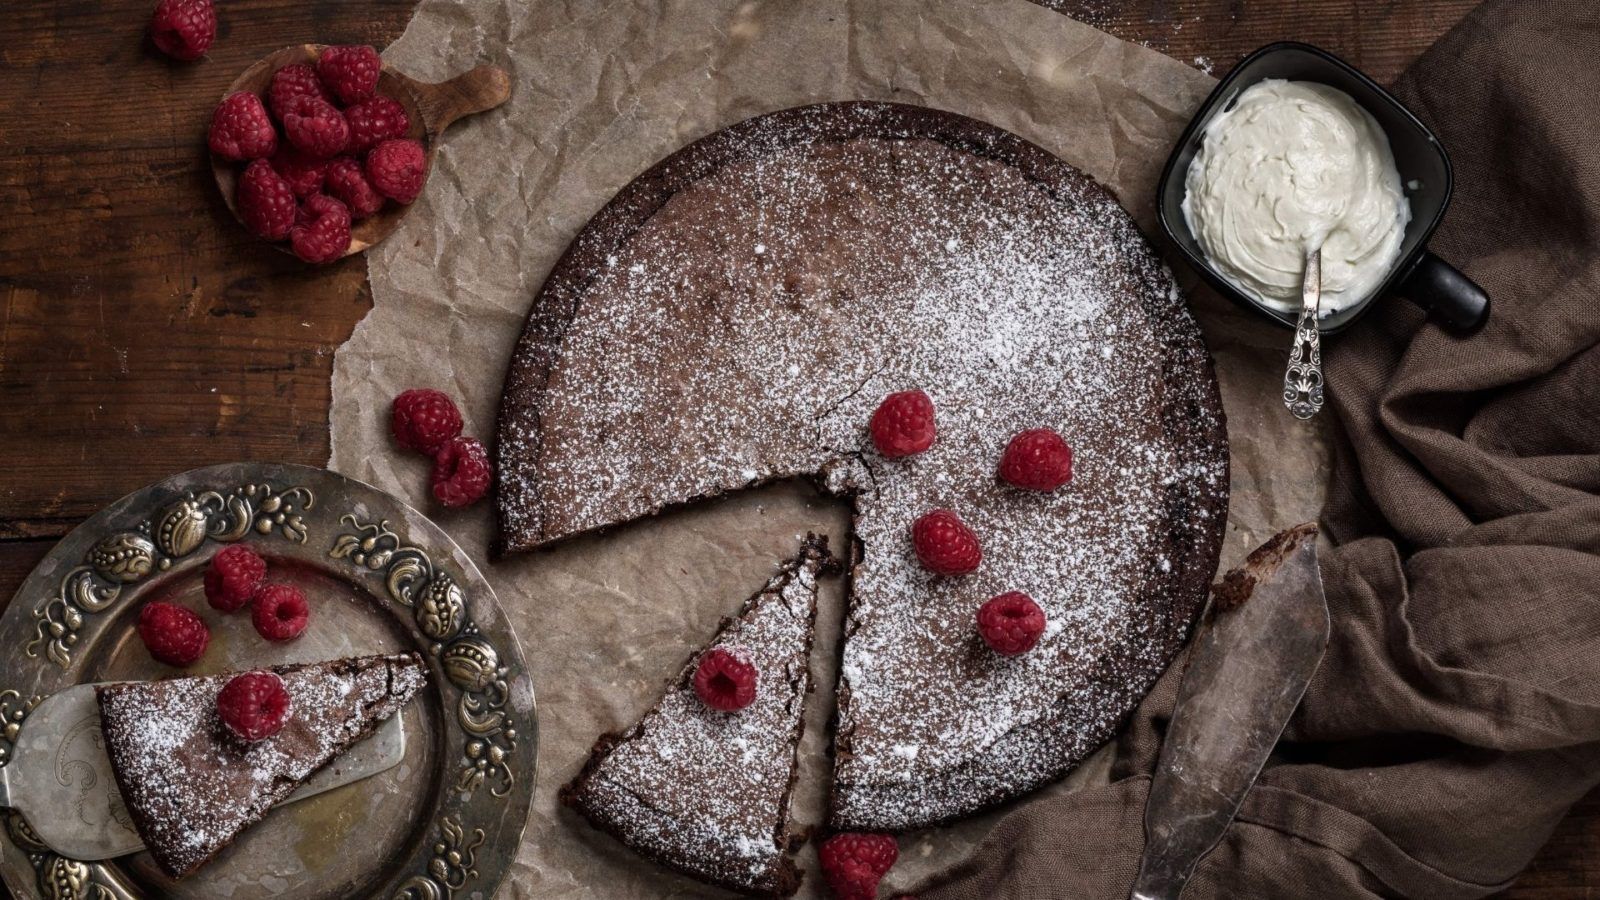 Love chocolate? Try these 8 unique dessert recipes from around the world